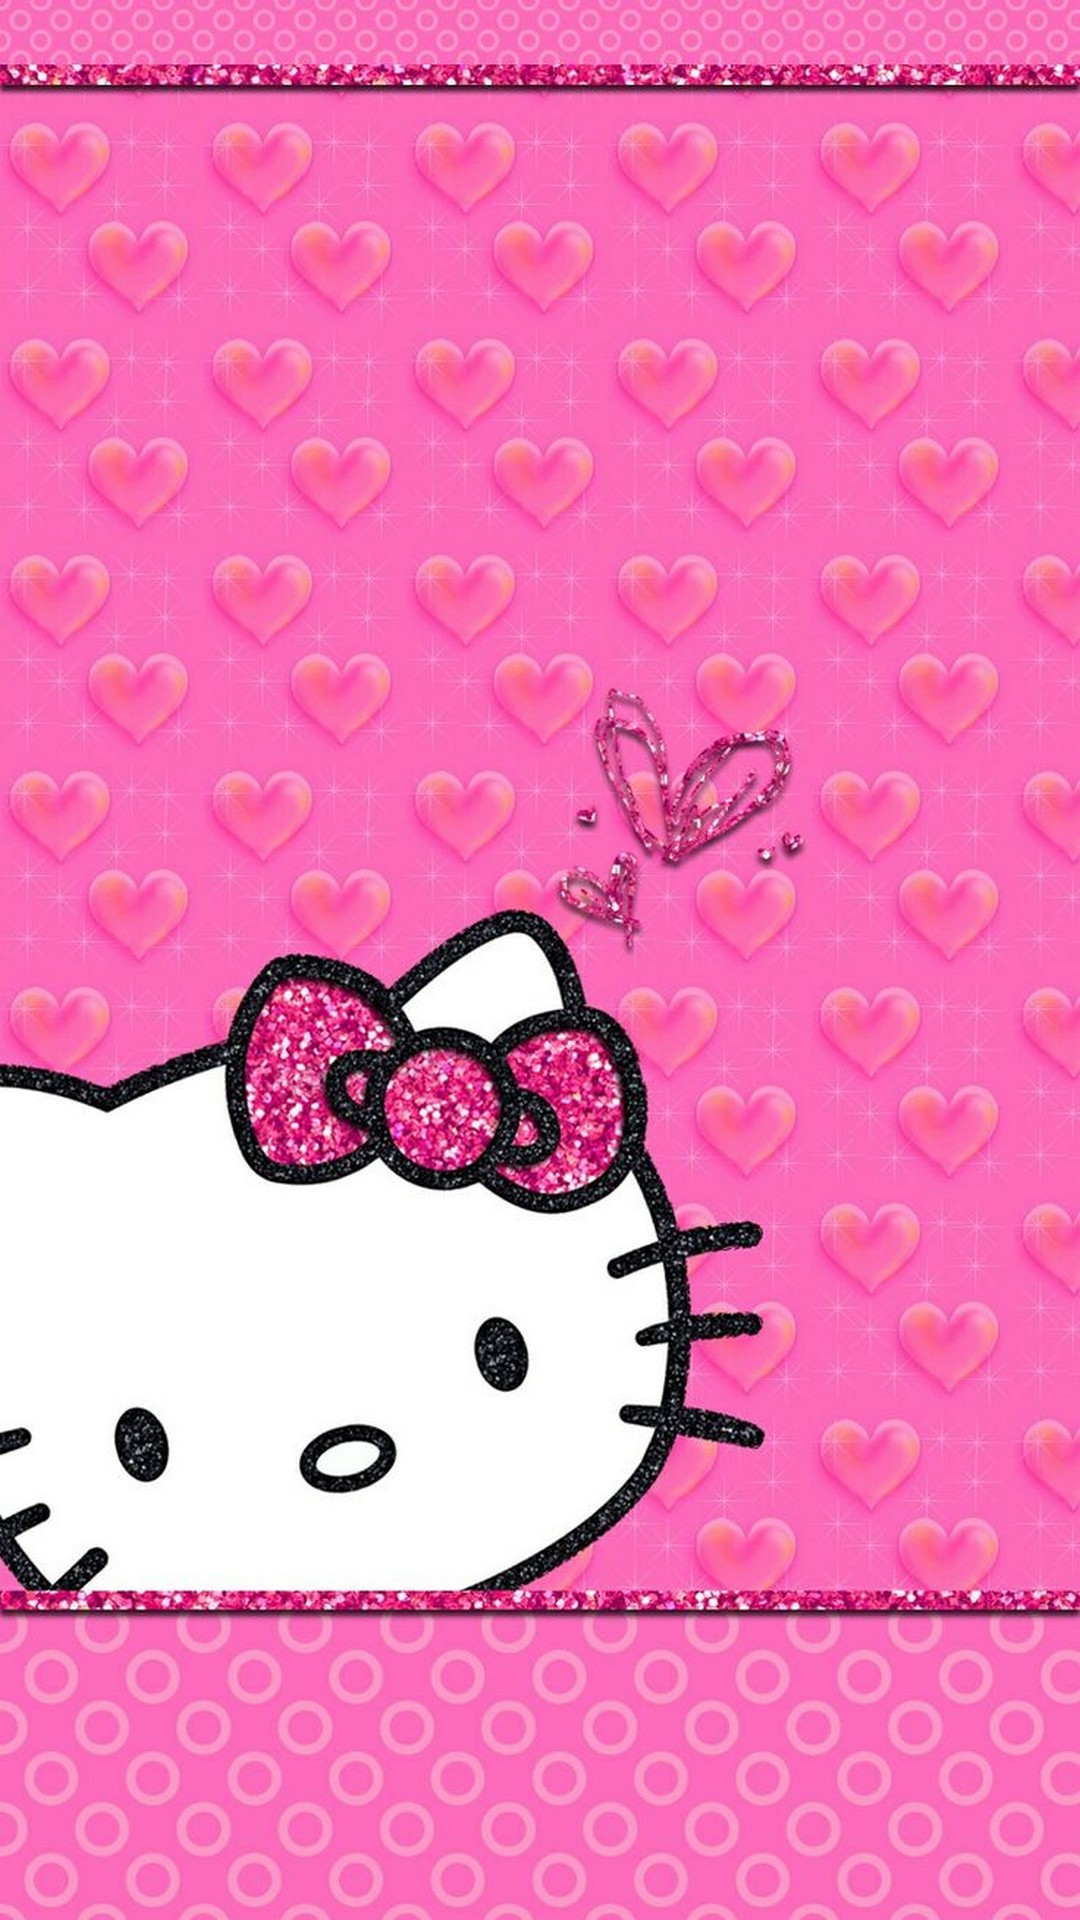 Hello Kitty Images Wallpaper For Android with resolution 1080X1920 pixel. You can make this wallpaper for your Android backgrounds, Tablet, Smartphones Screensavers and Mobile Phone Lock Screen